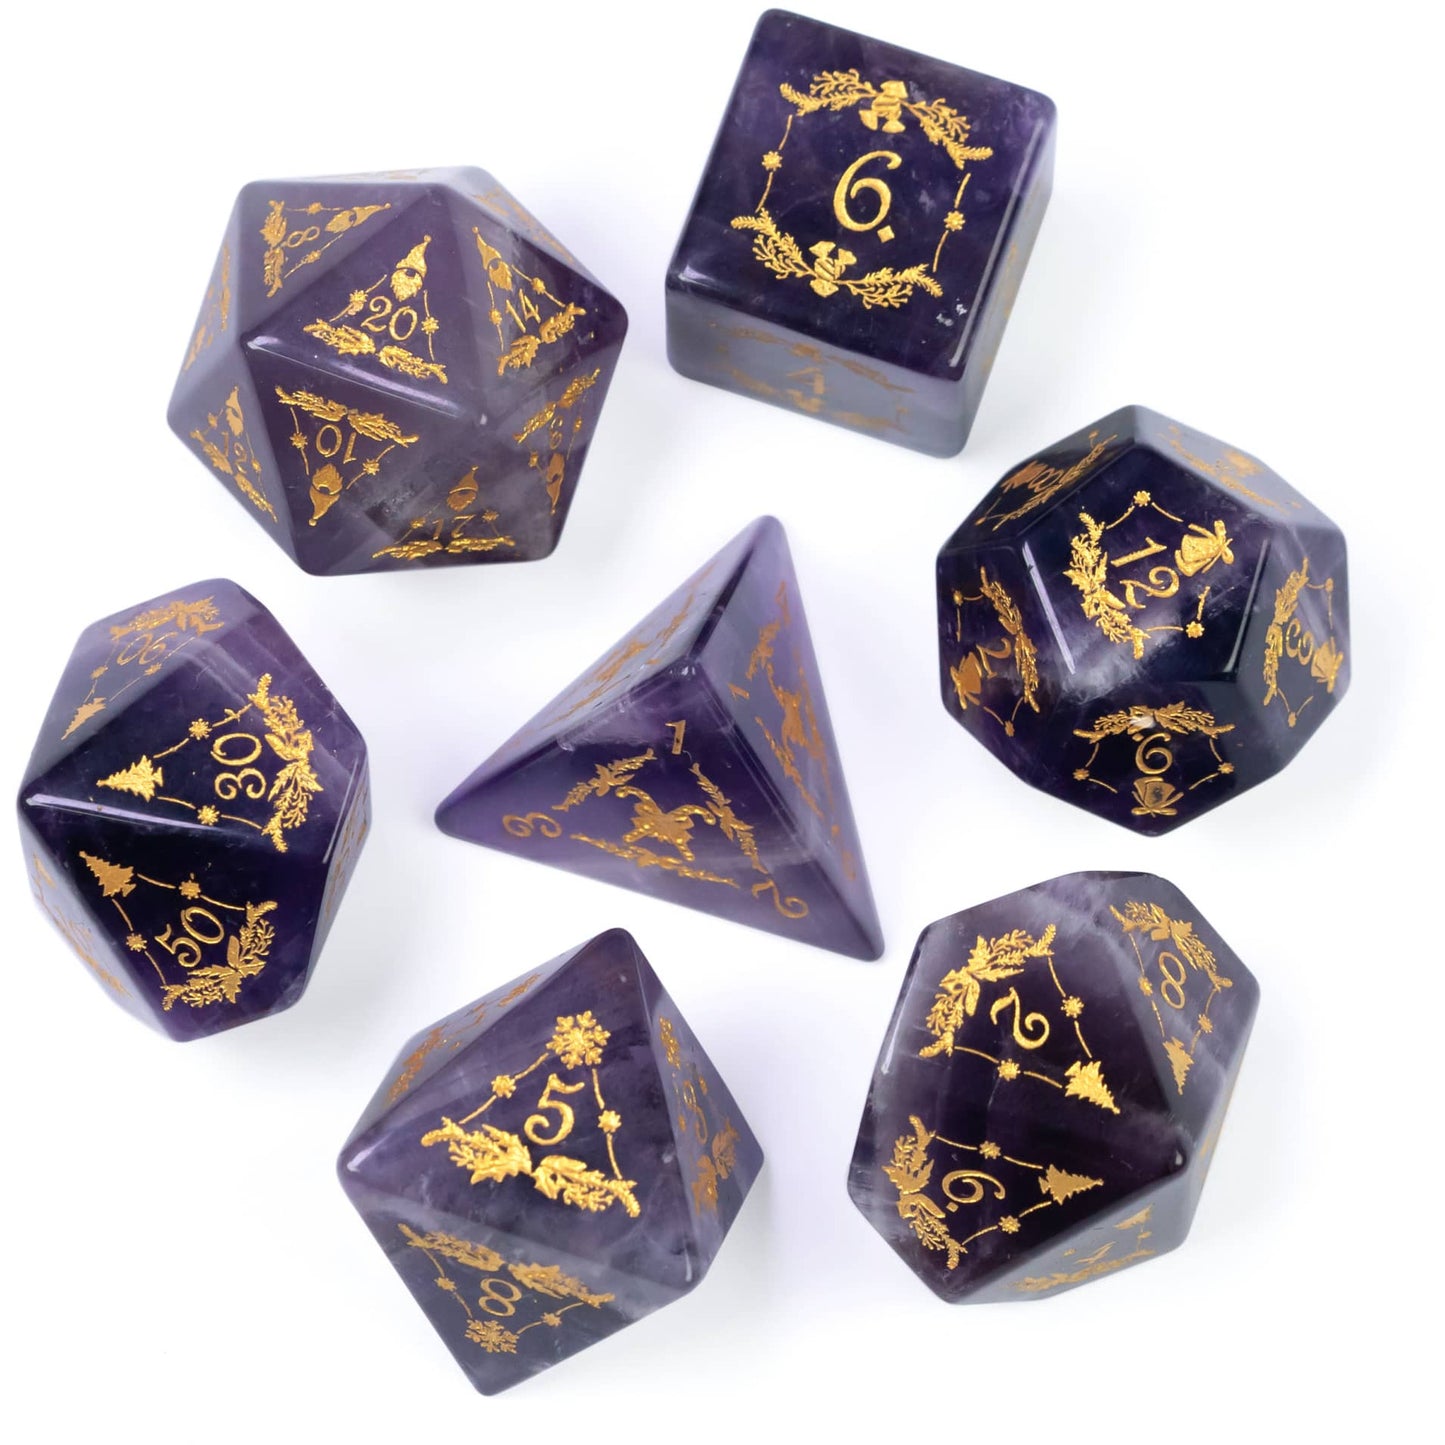 embellished purple stone dice, gold livery